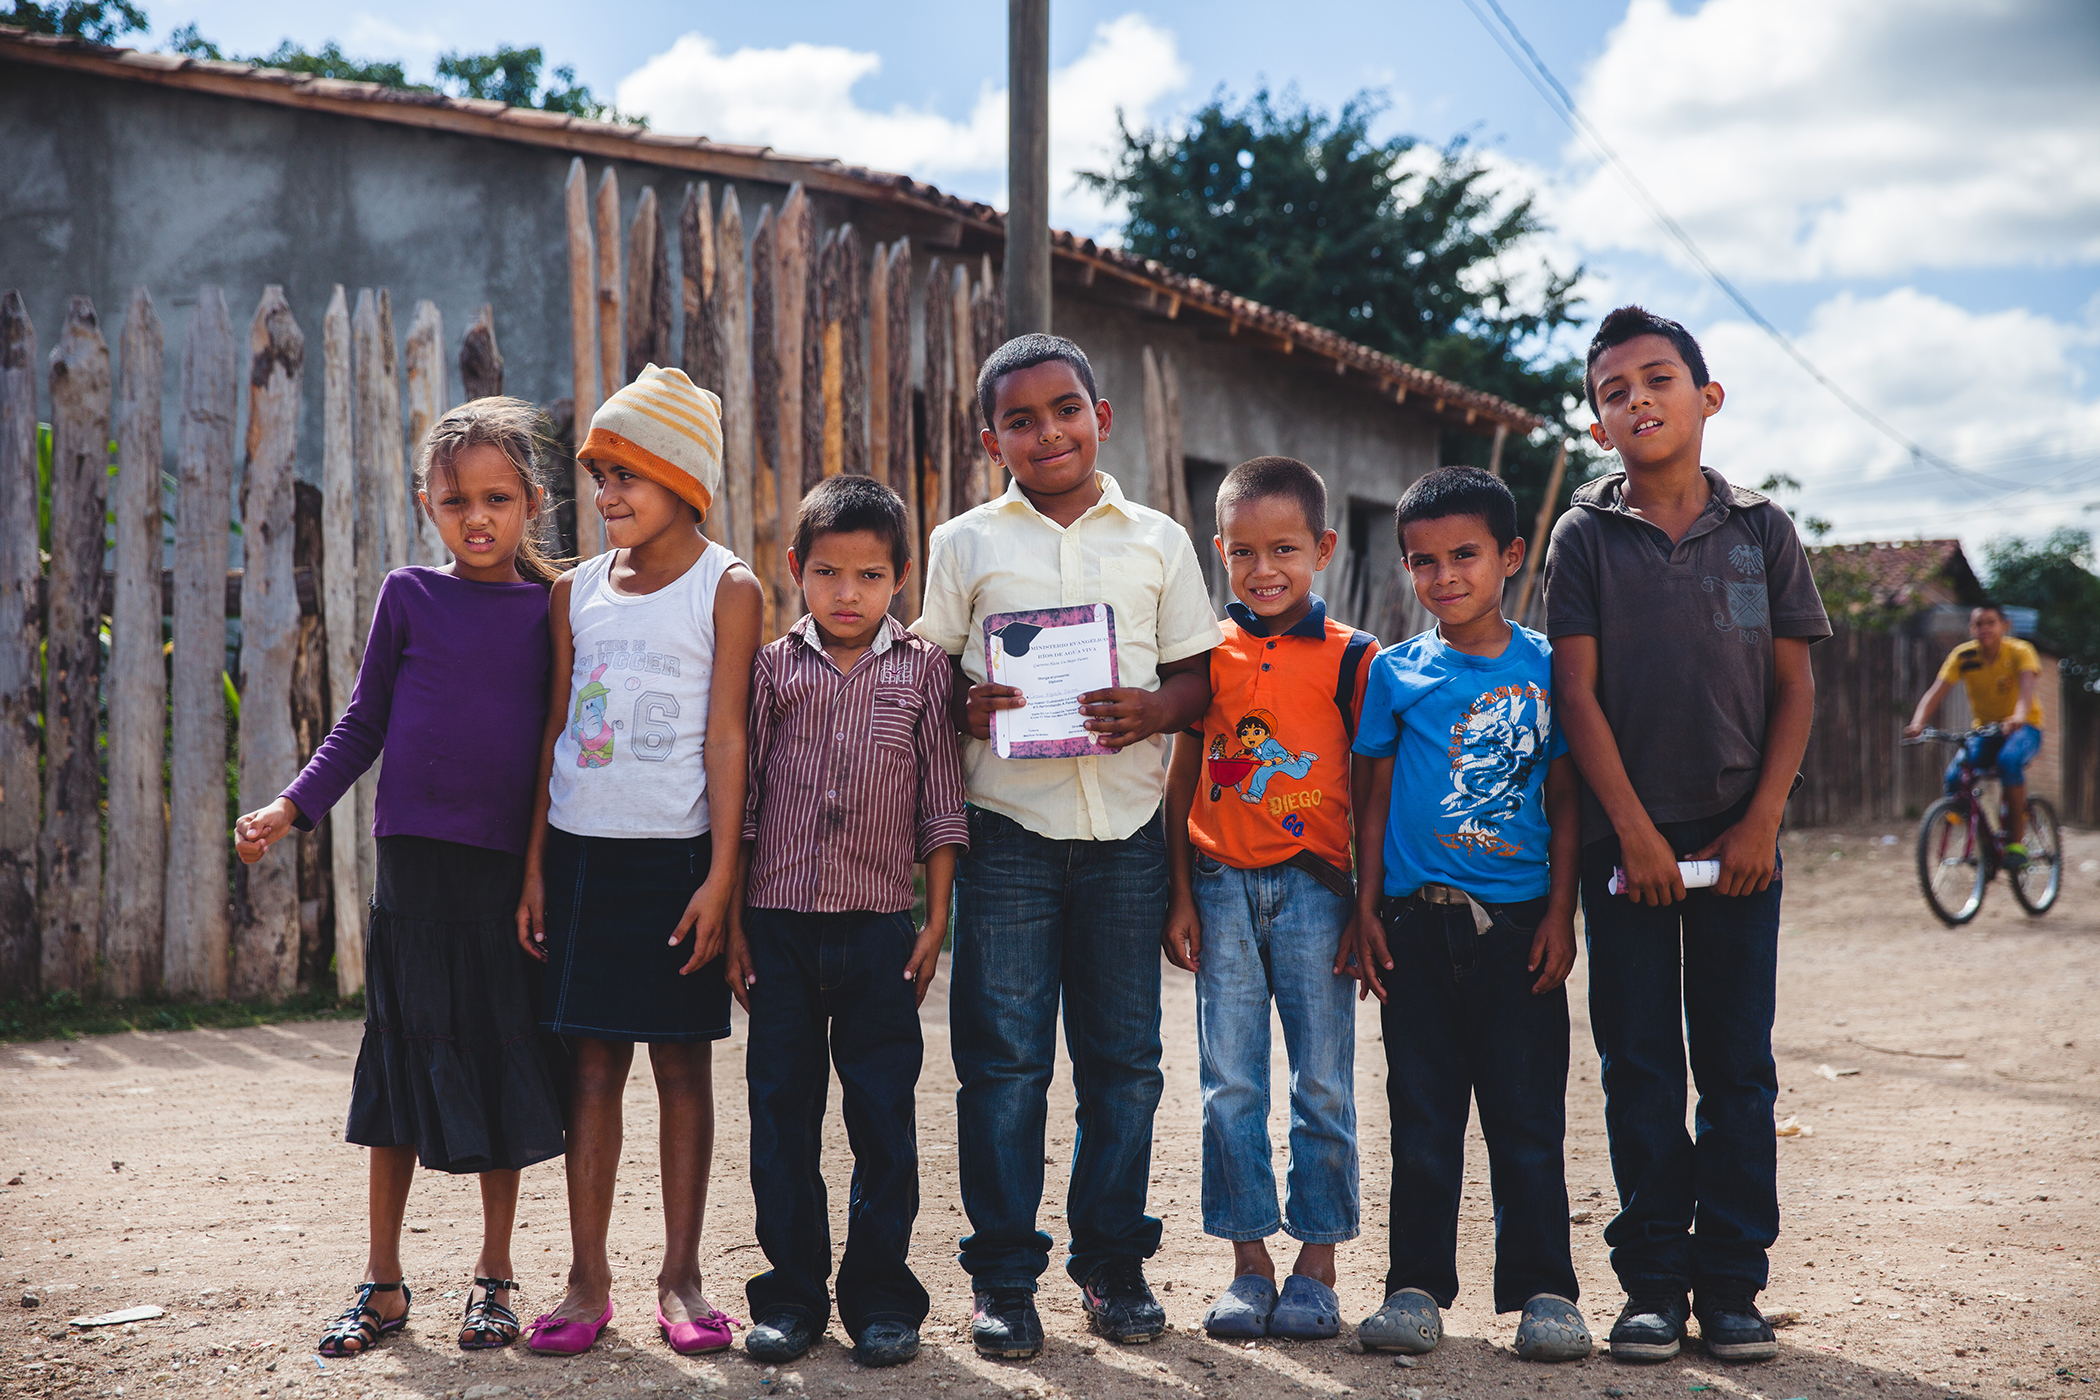 Child Poverty in Latin America - A group of impoverished children